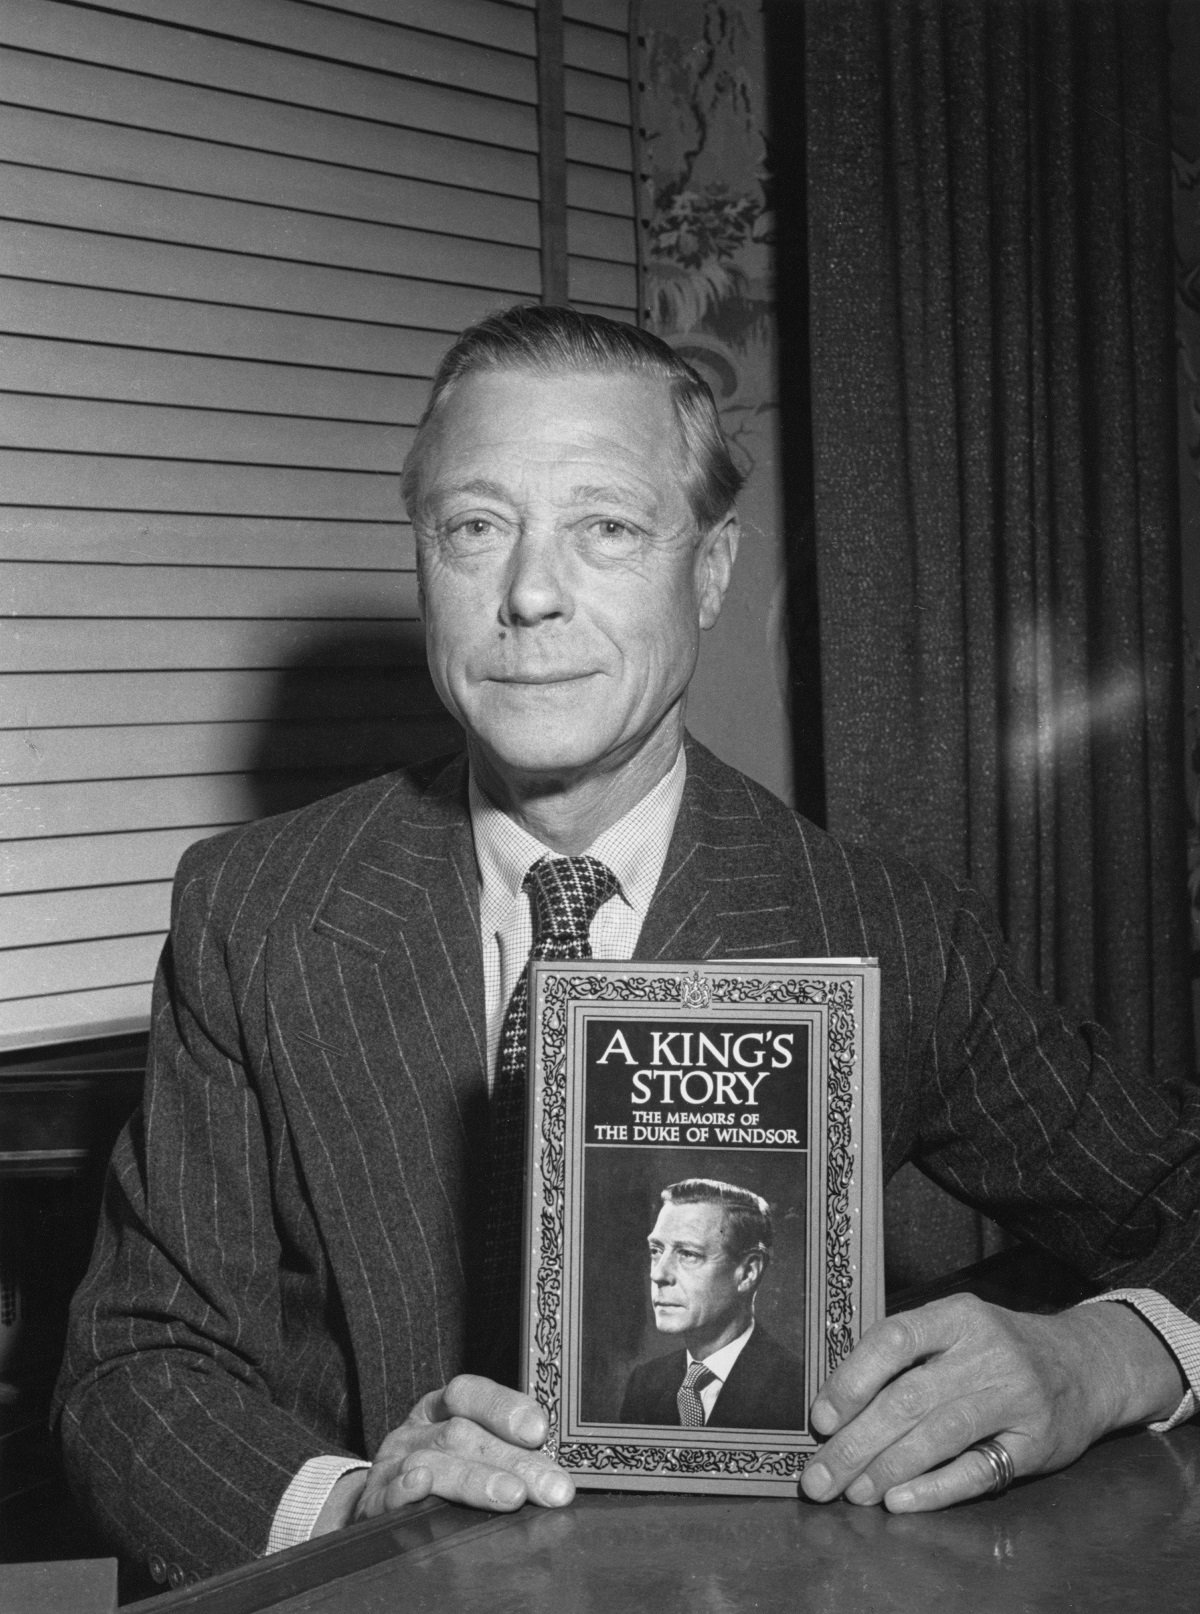 The Duke of Windsor formerly King Edward VIII holding his memoirs 'A King's Story The Memoirs of the Duke of Windsor'